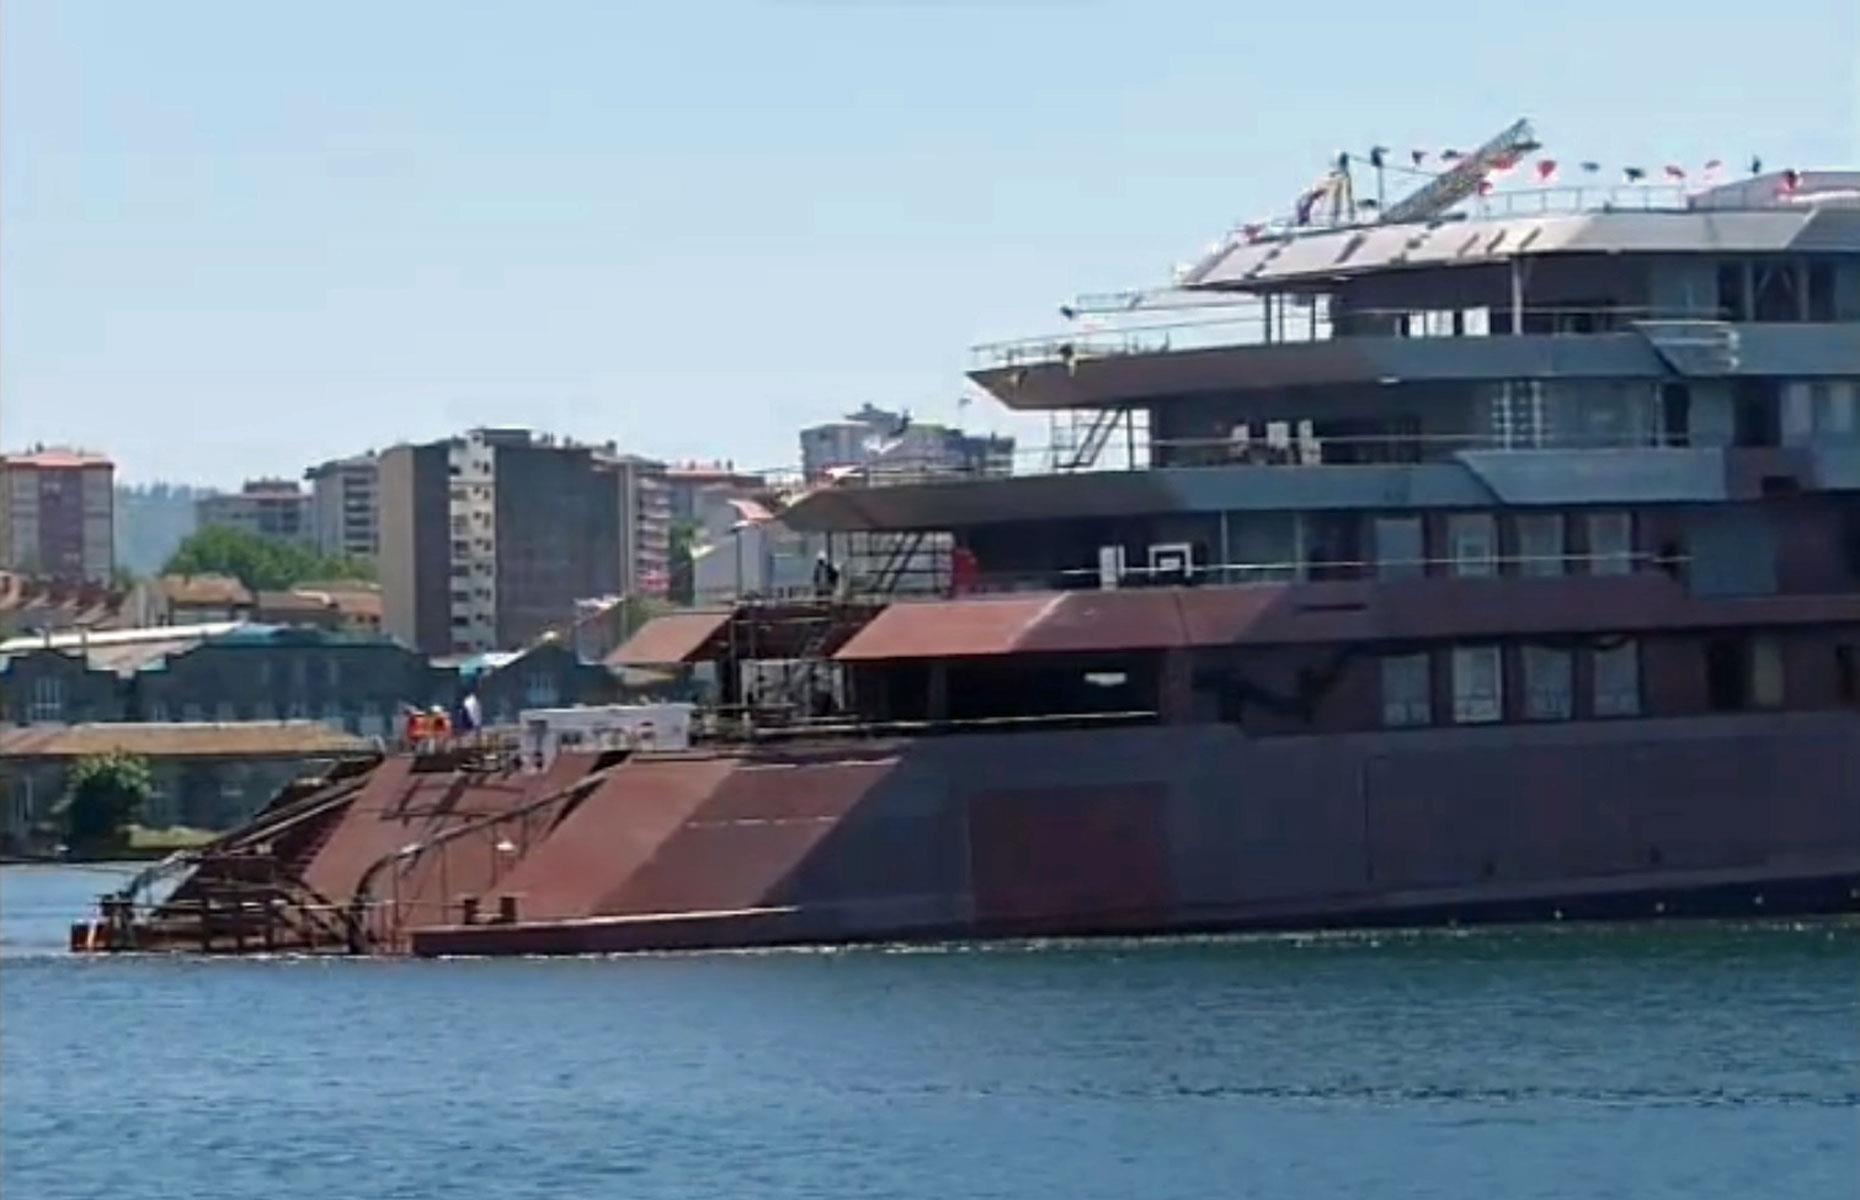 <p>The superyacht may be kitted out with all the classic creature comforts but, as a roving expedition vessel, the emphasis is on performance rather than amenities.</p>  <p>Reflecting other high-end shipbuilders, Freire has chosen to keep the price of the superyacht a secret in the interest of client confidentiality.</p>